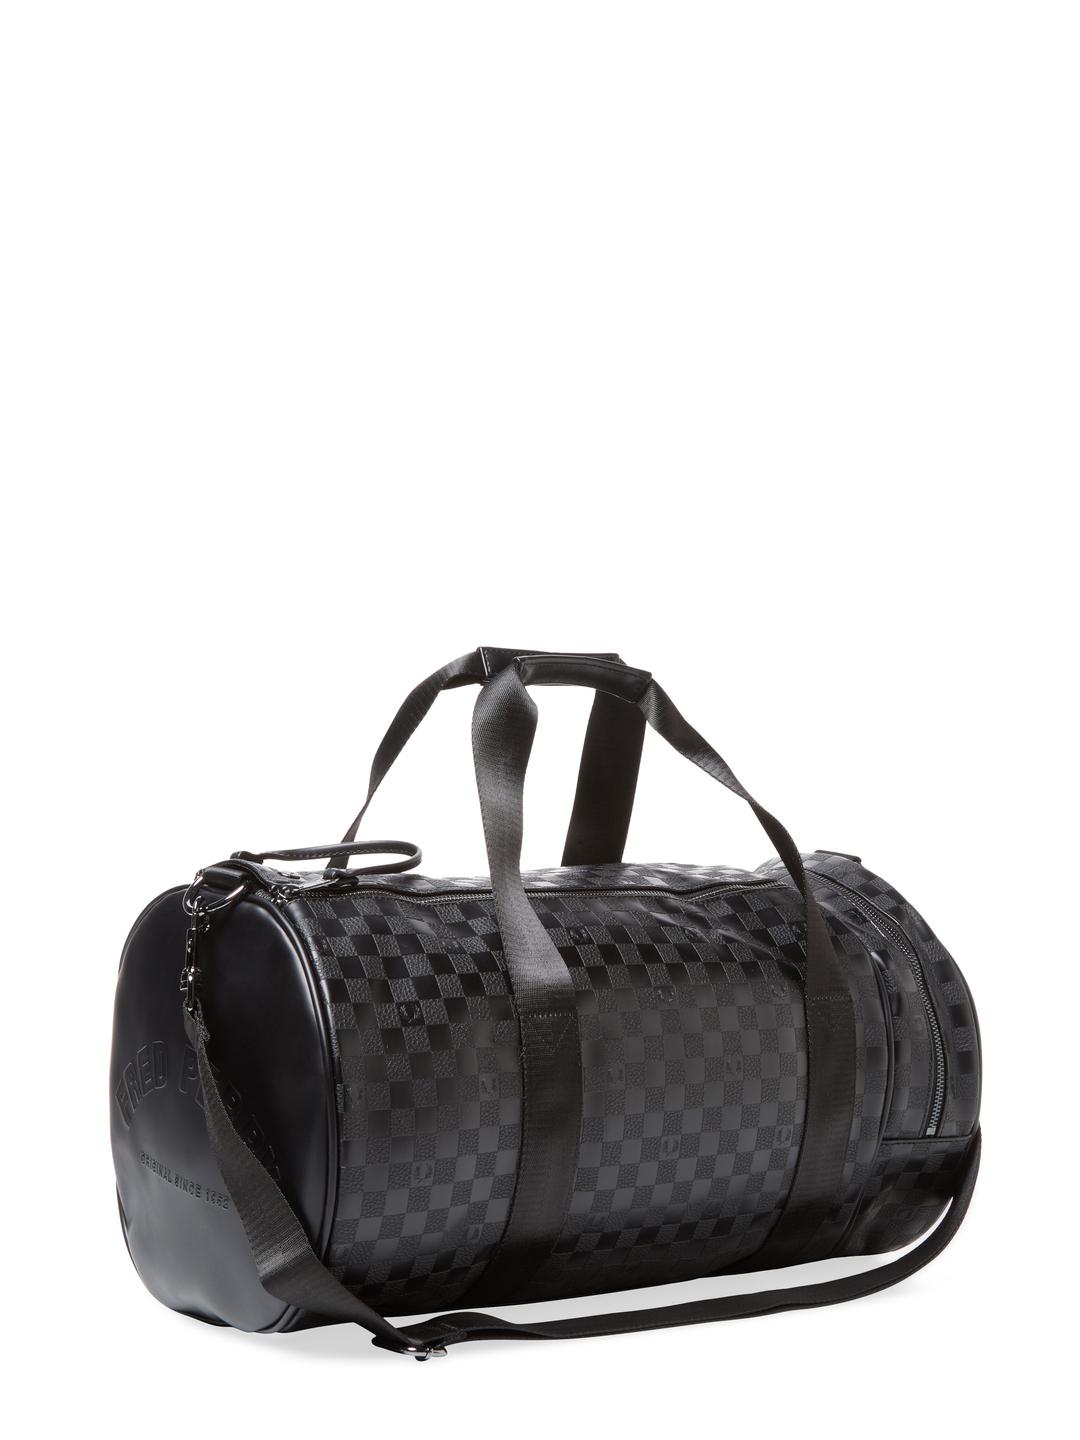 Fred Perry Checkerboard Barrel Bag in Black for Men - Lyst